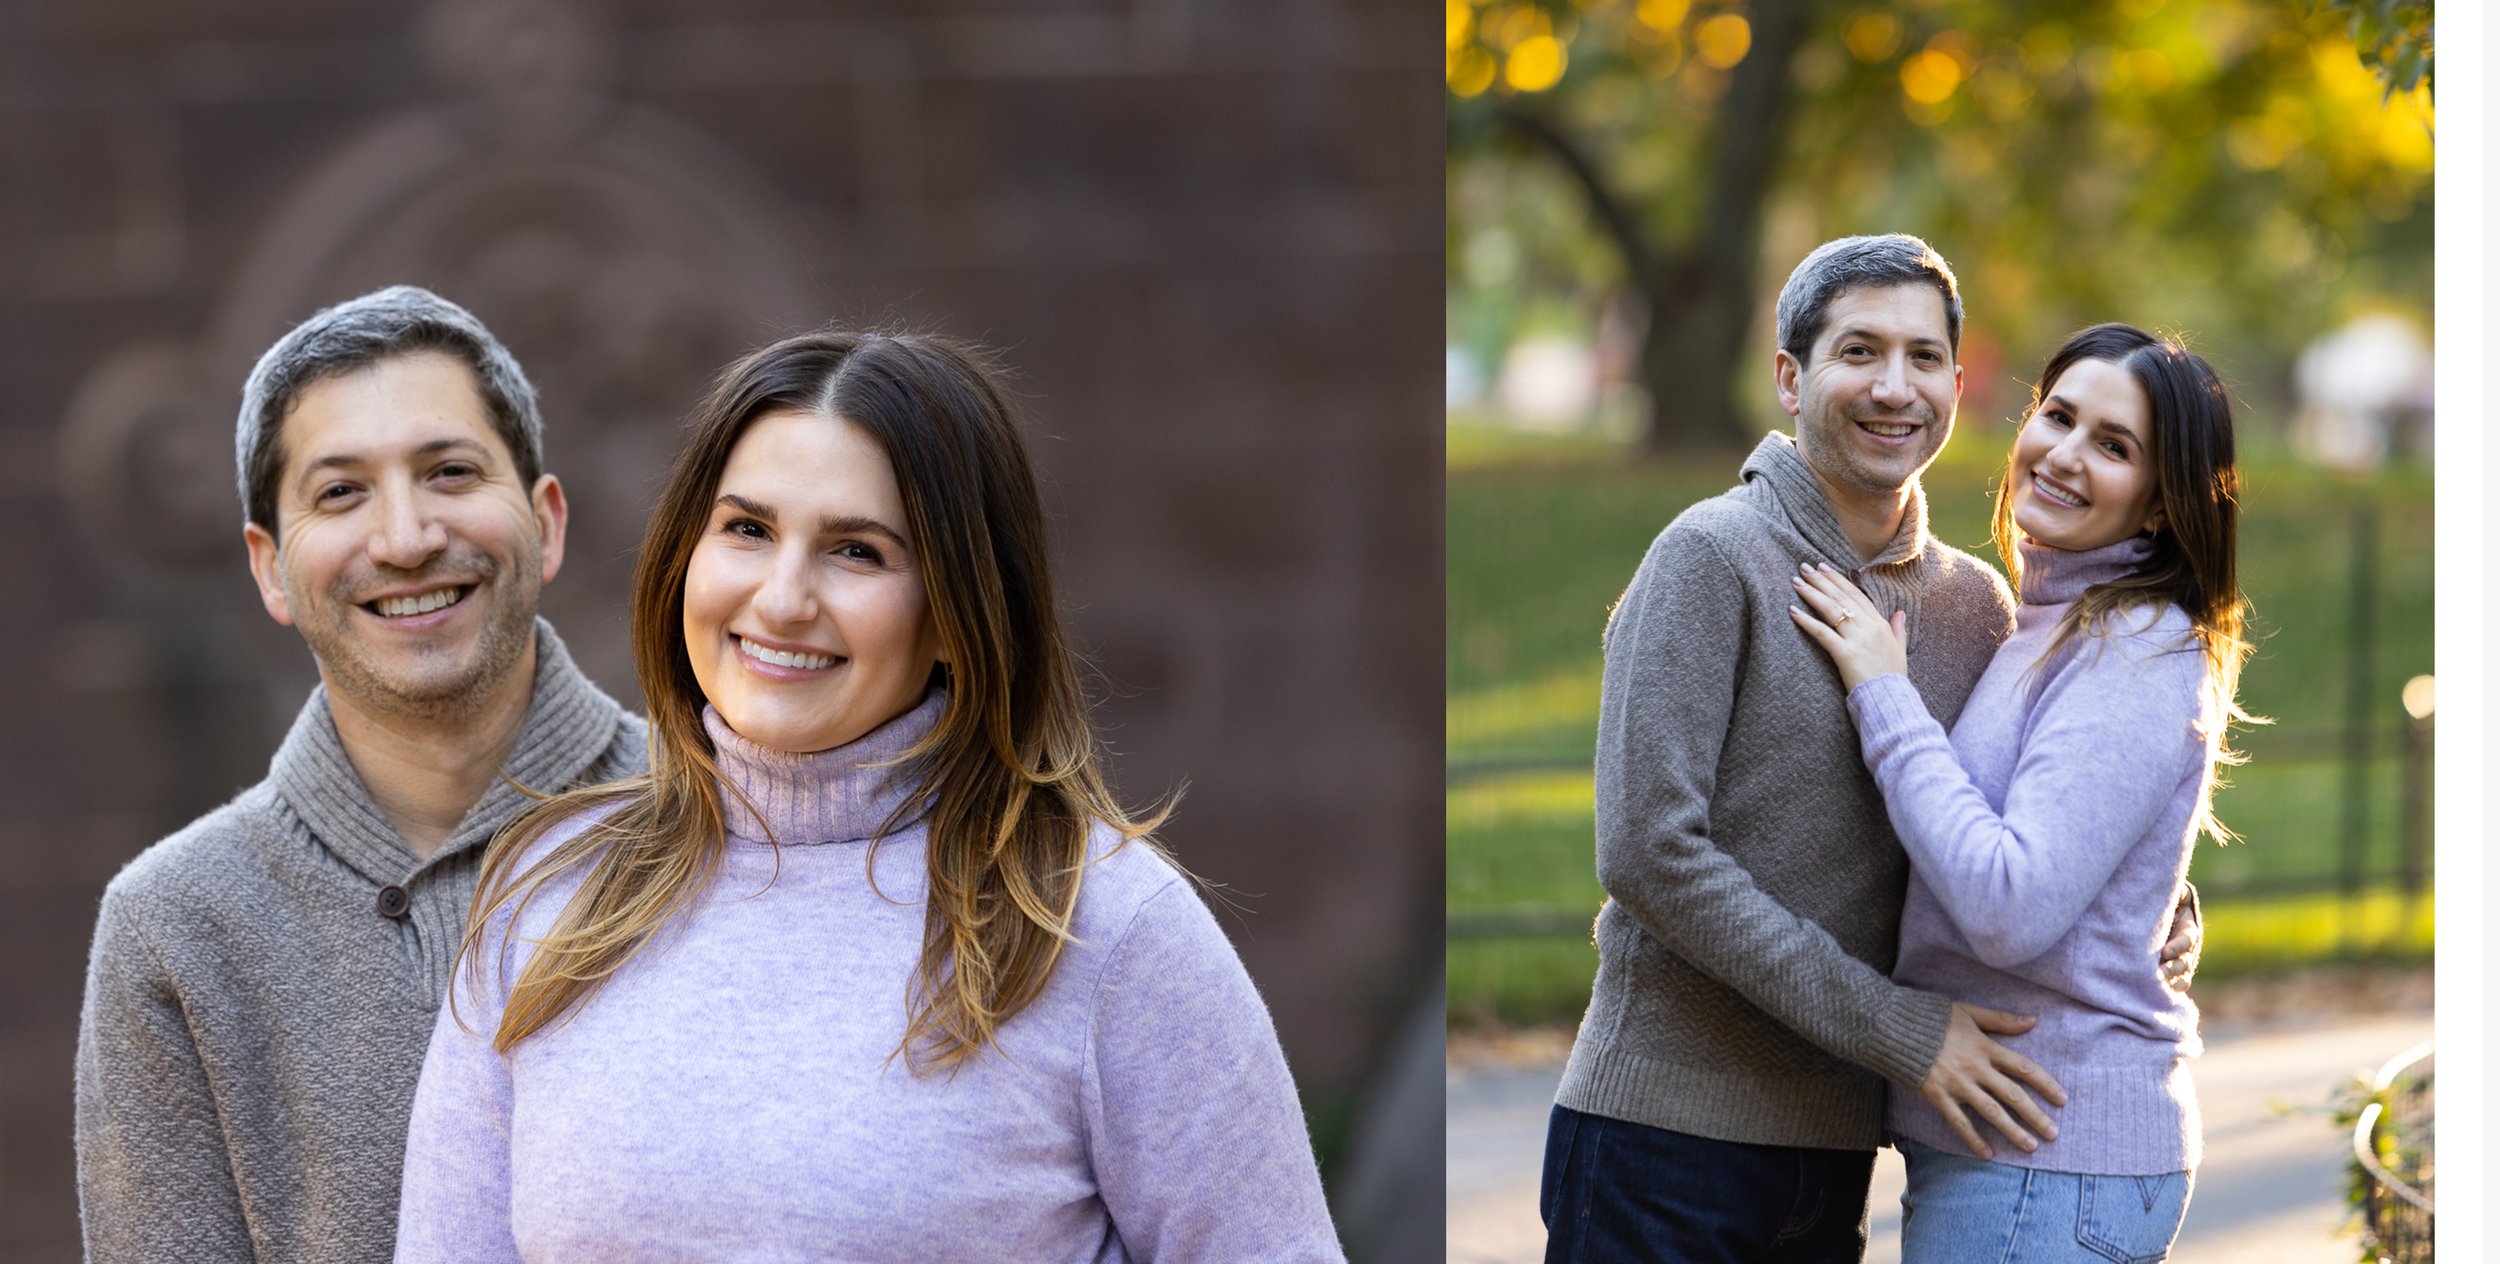 Central Park NYC Fall Foliage Engagement Session_1194.jpg